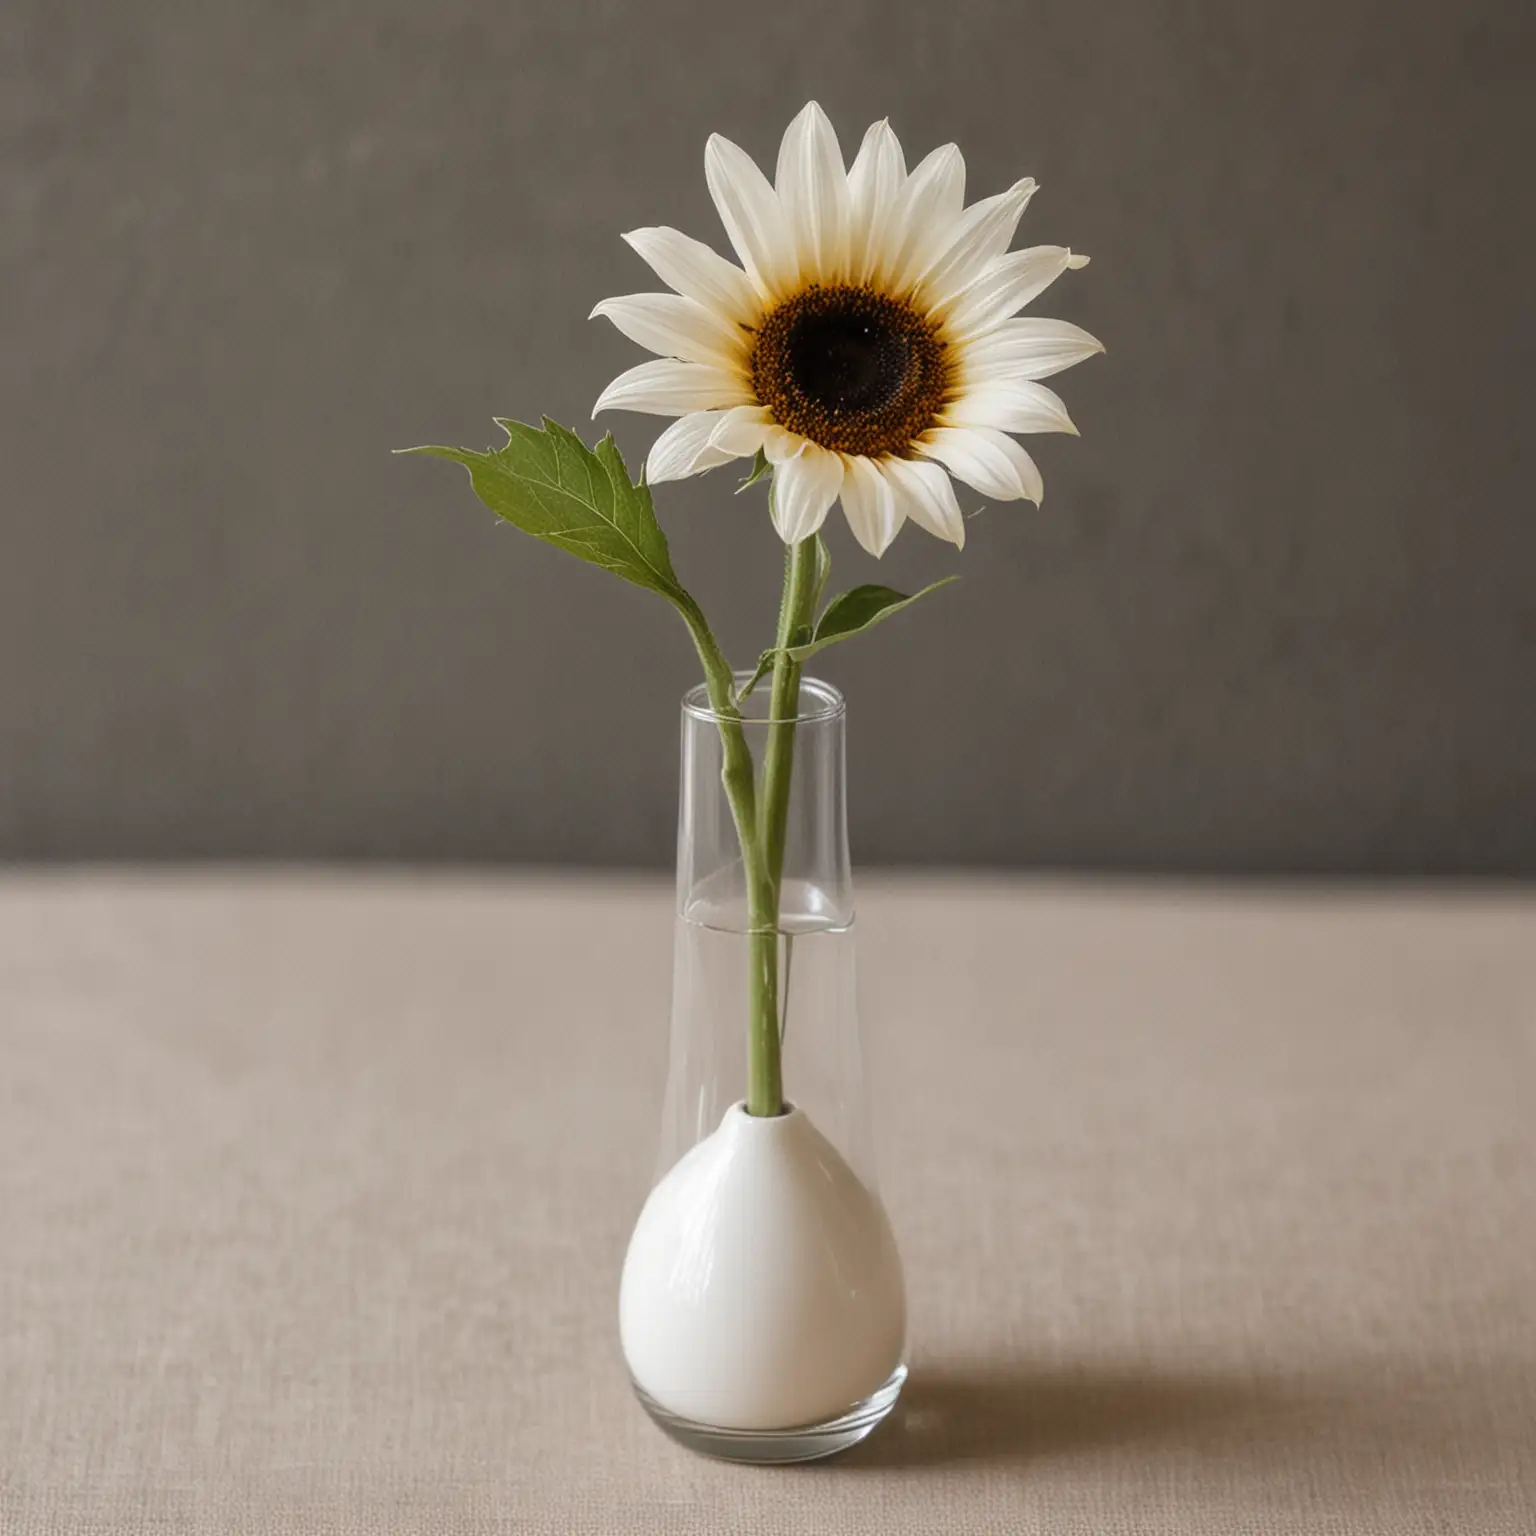 simple minimalist wedding centerpiece with a single sunflower in a small white bud vase